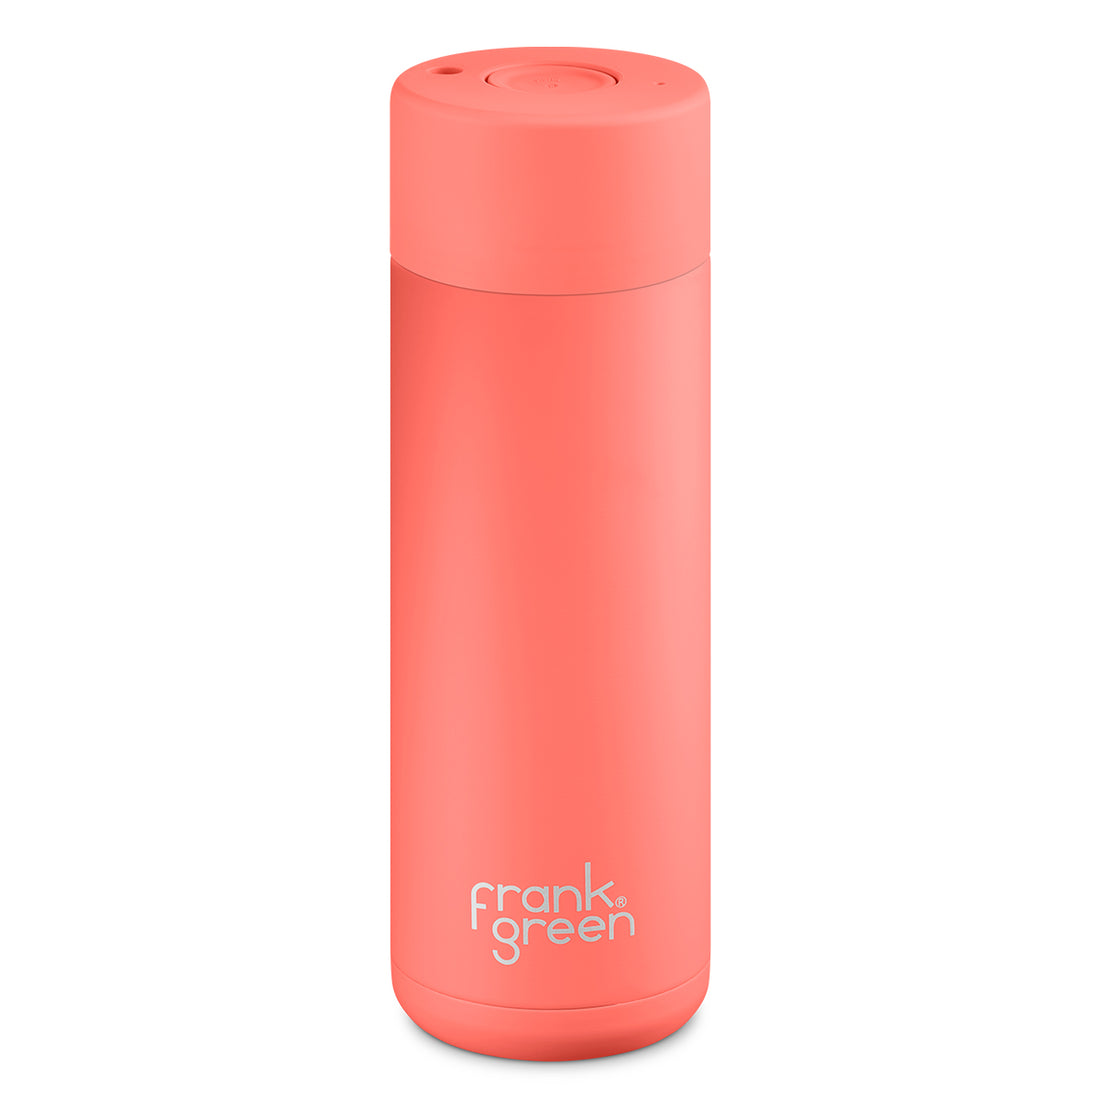 Frank Green, Frank Green 20oz/595ml Ceramic Reusable Bottle with Button Lid - Living Coral, Redber Coffee